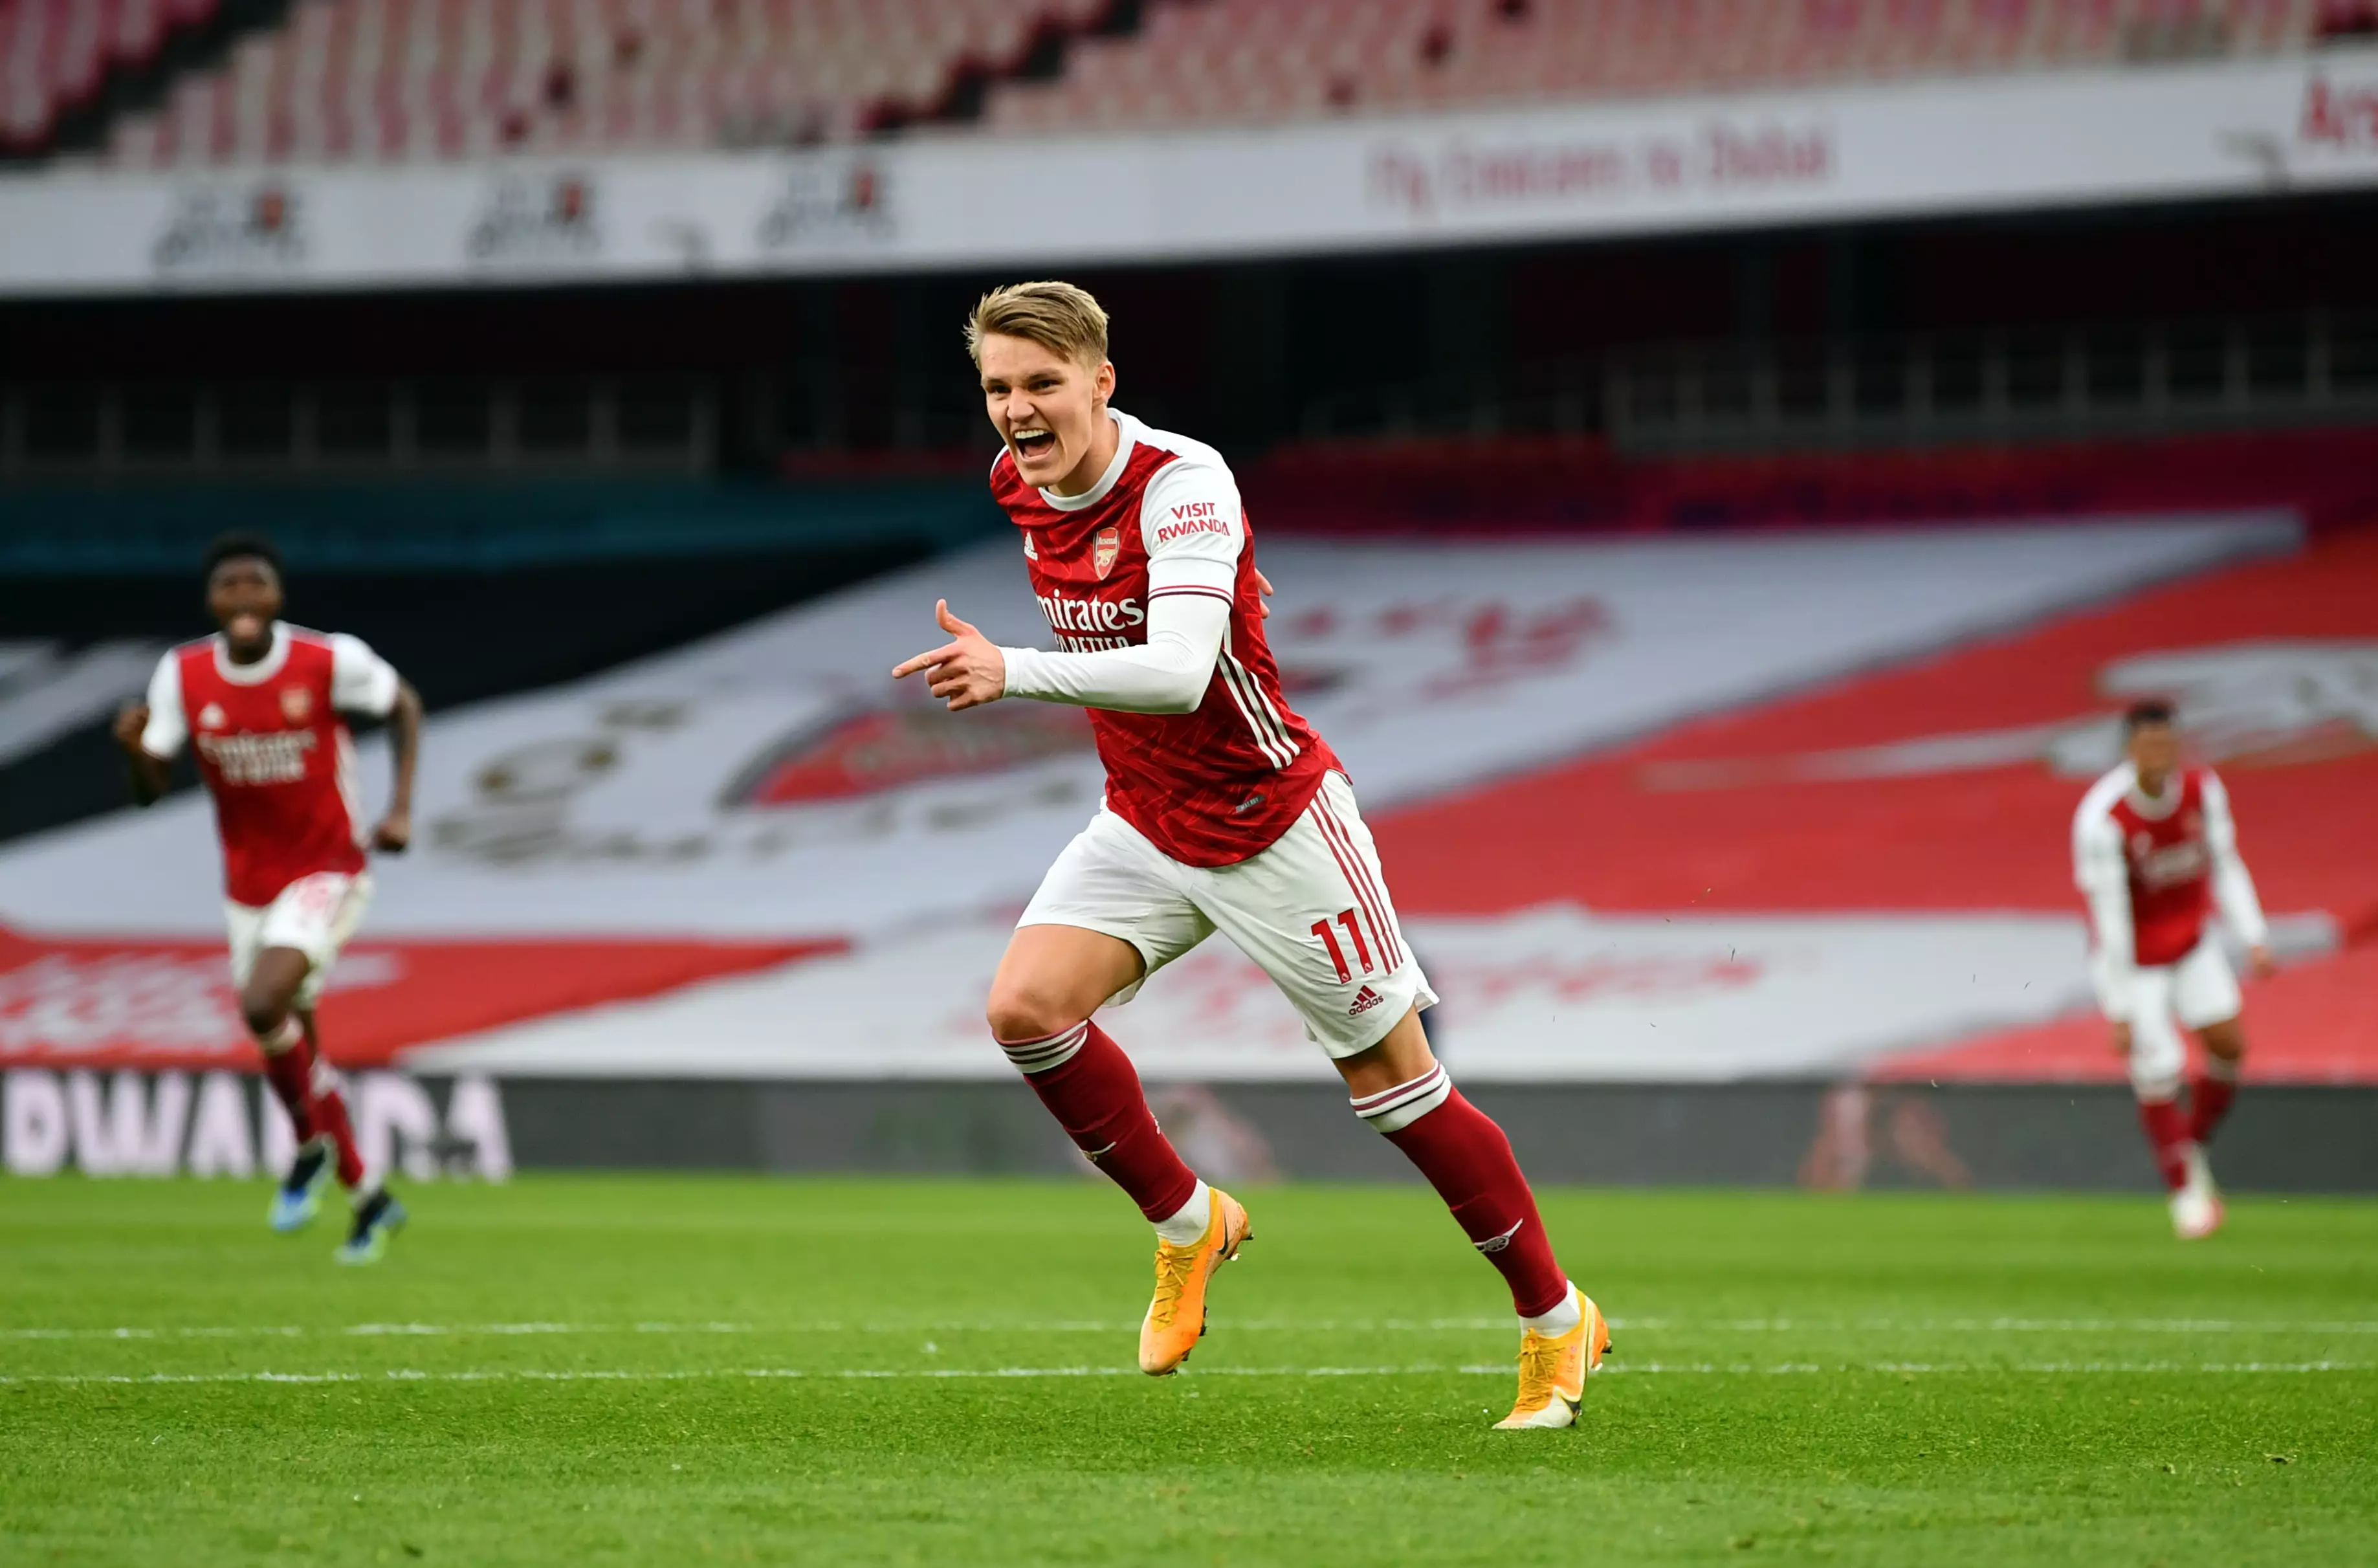 Odegaard is really showing his talent on loan at Arsenal. Image: PA Images